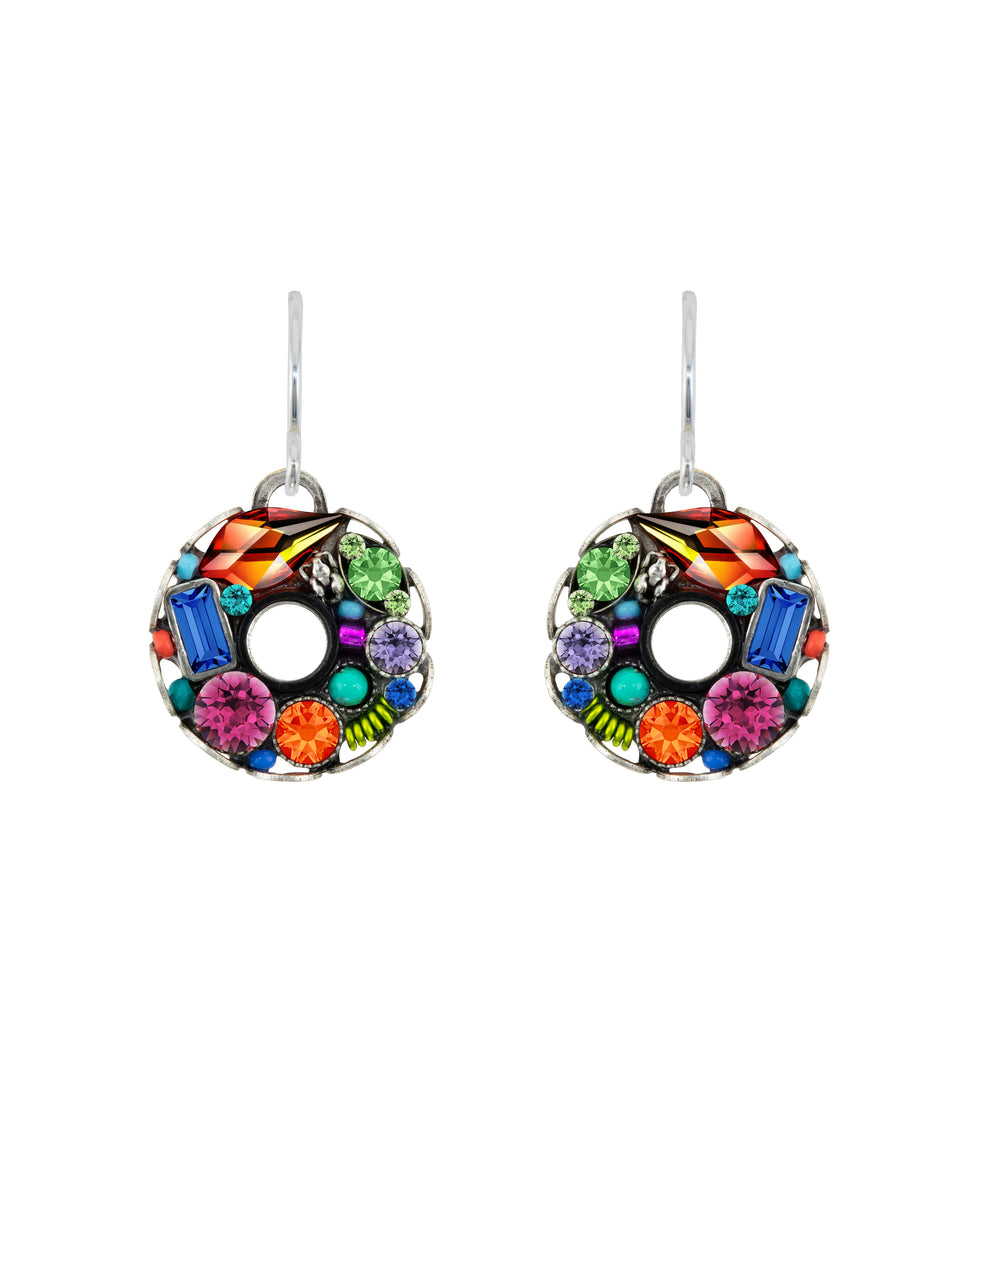 Firefly Mosaics: Bejeweled Earrings in Multi-color